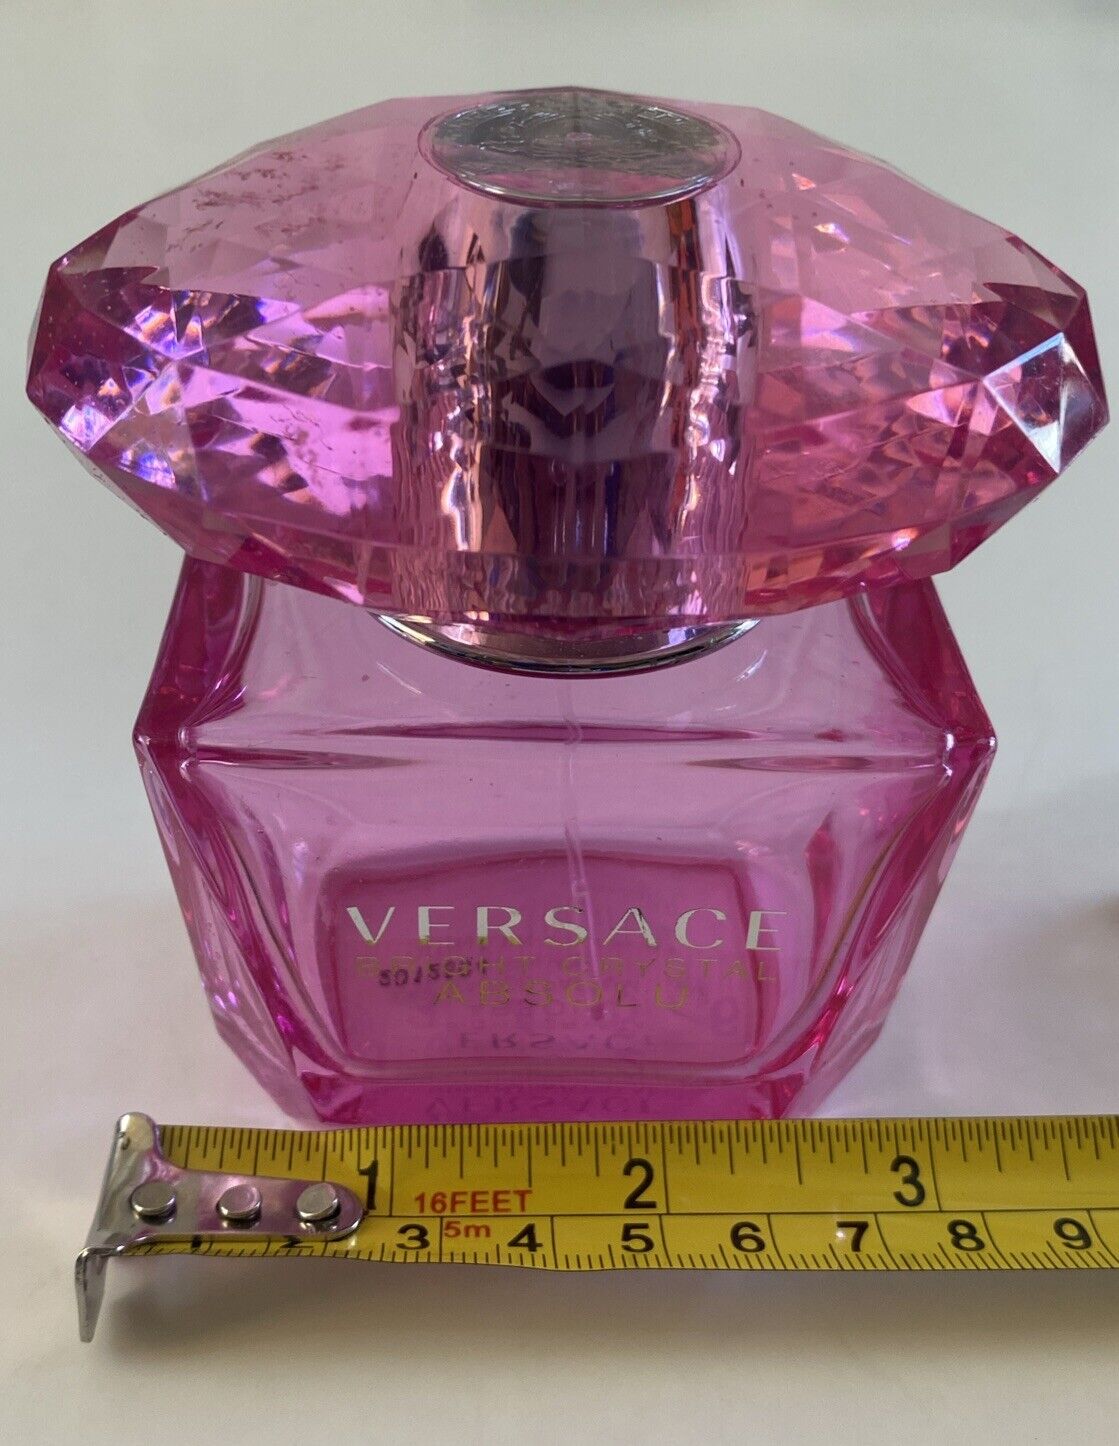 VERSACE Bright Crystal ABSOLU EMPTY 3.0 fl oz Perfume Bottle Made In Italy